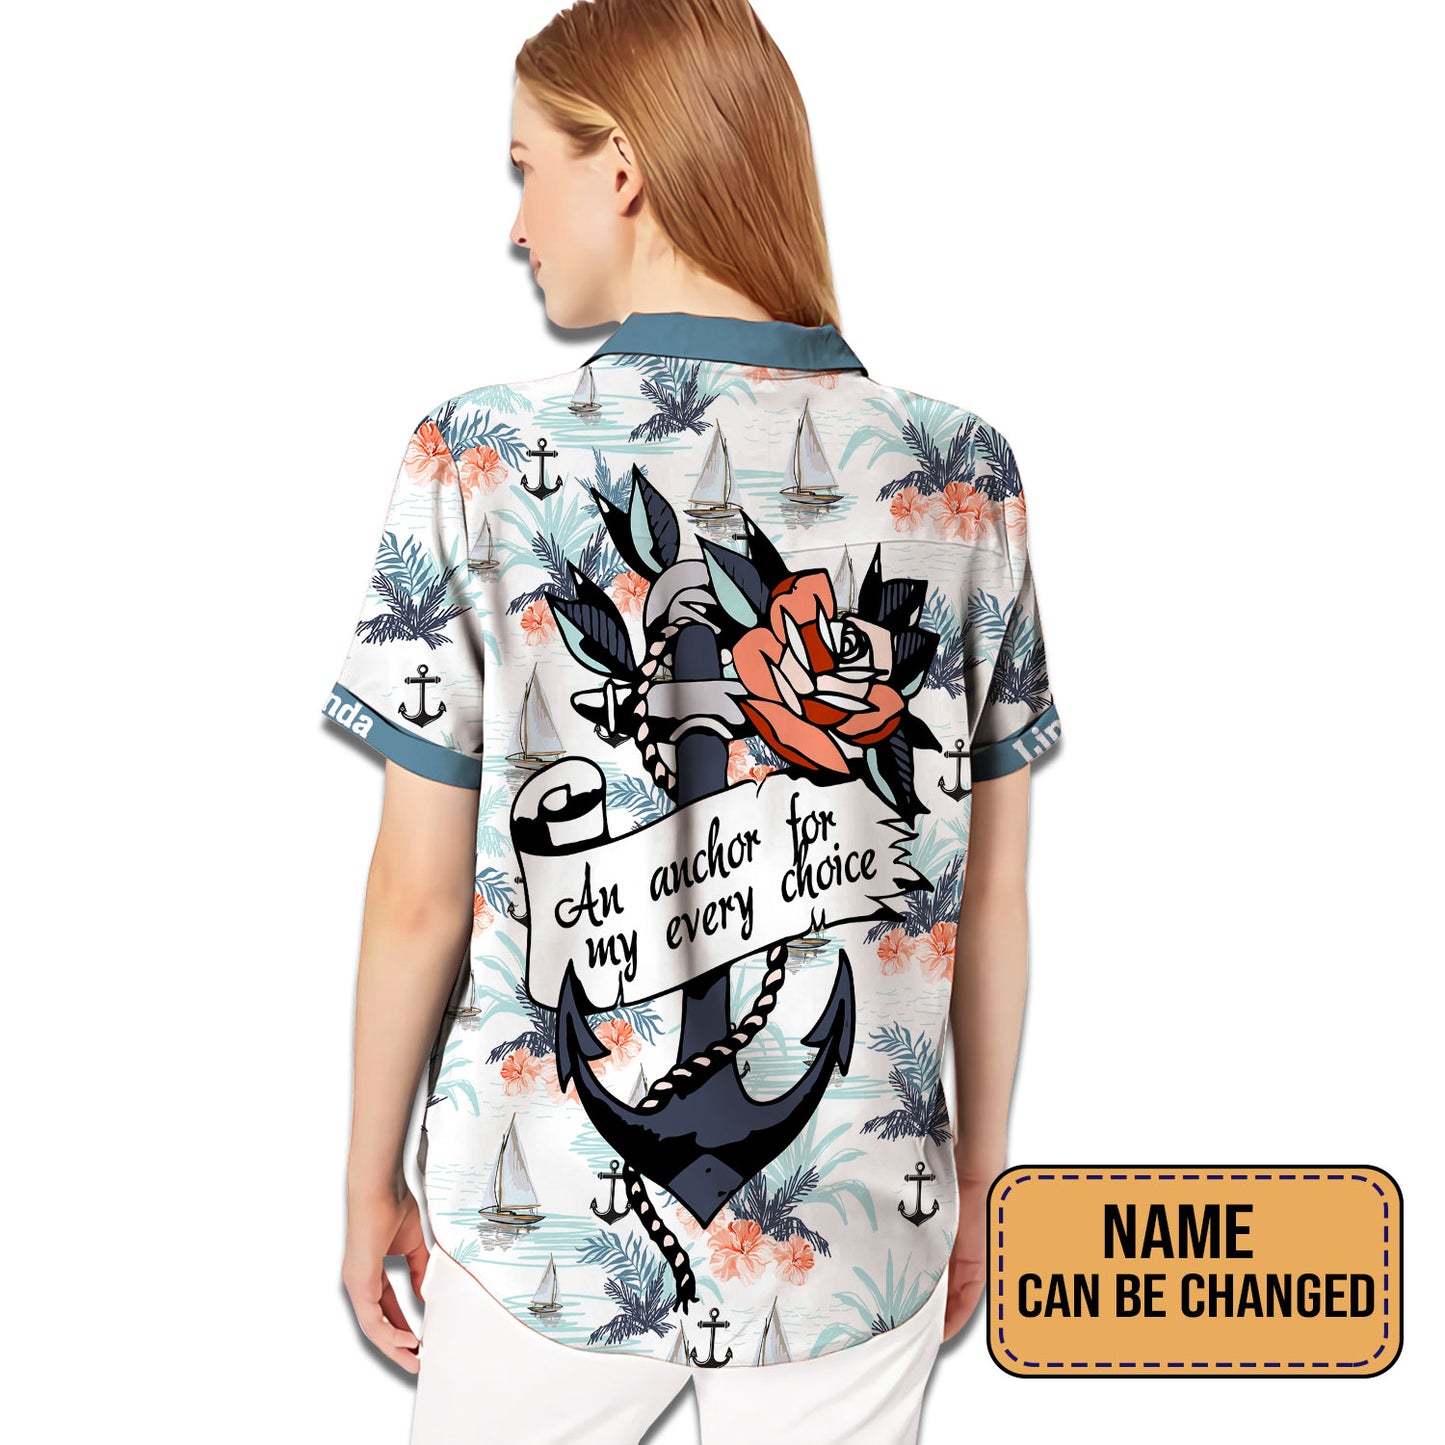 A Ship That Always Stays The Course Custom Name Matching Hawaiian Shirt Personalizedwitch For Couple